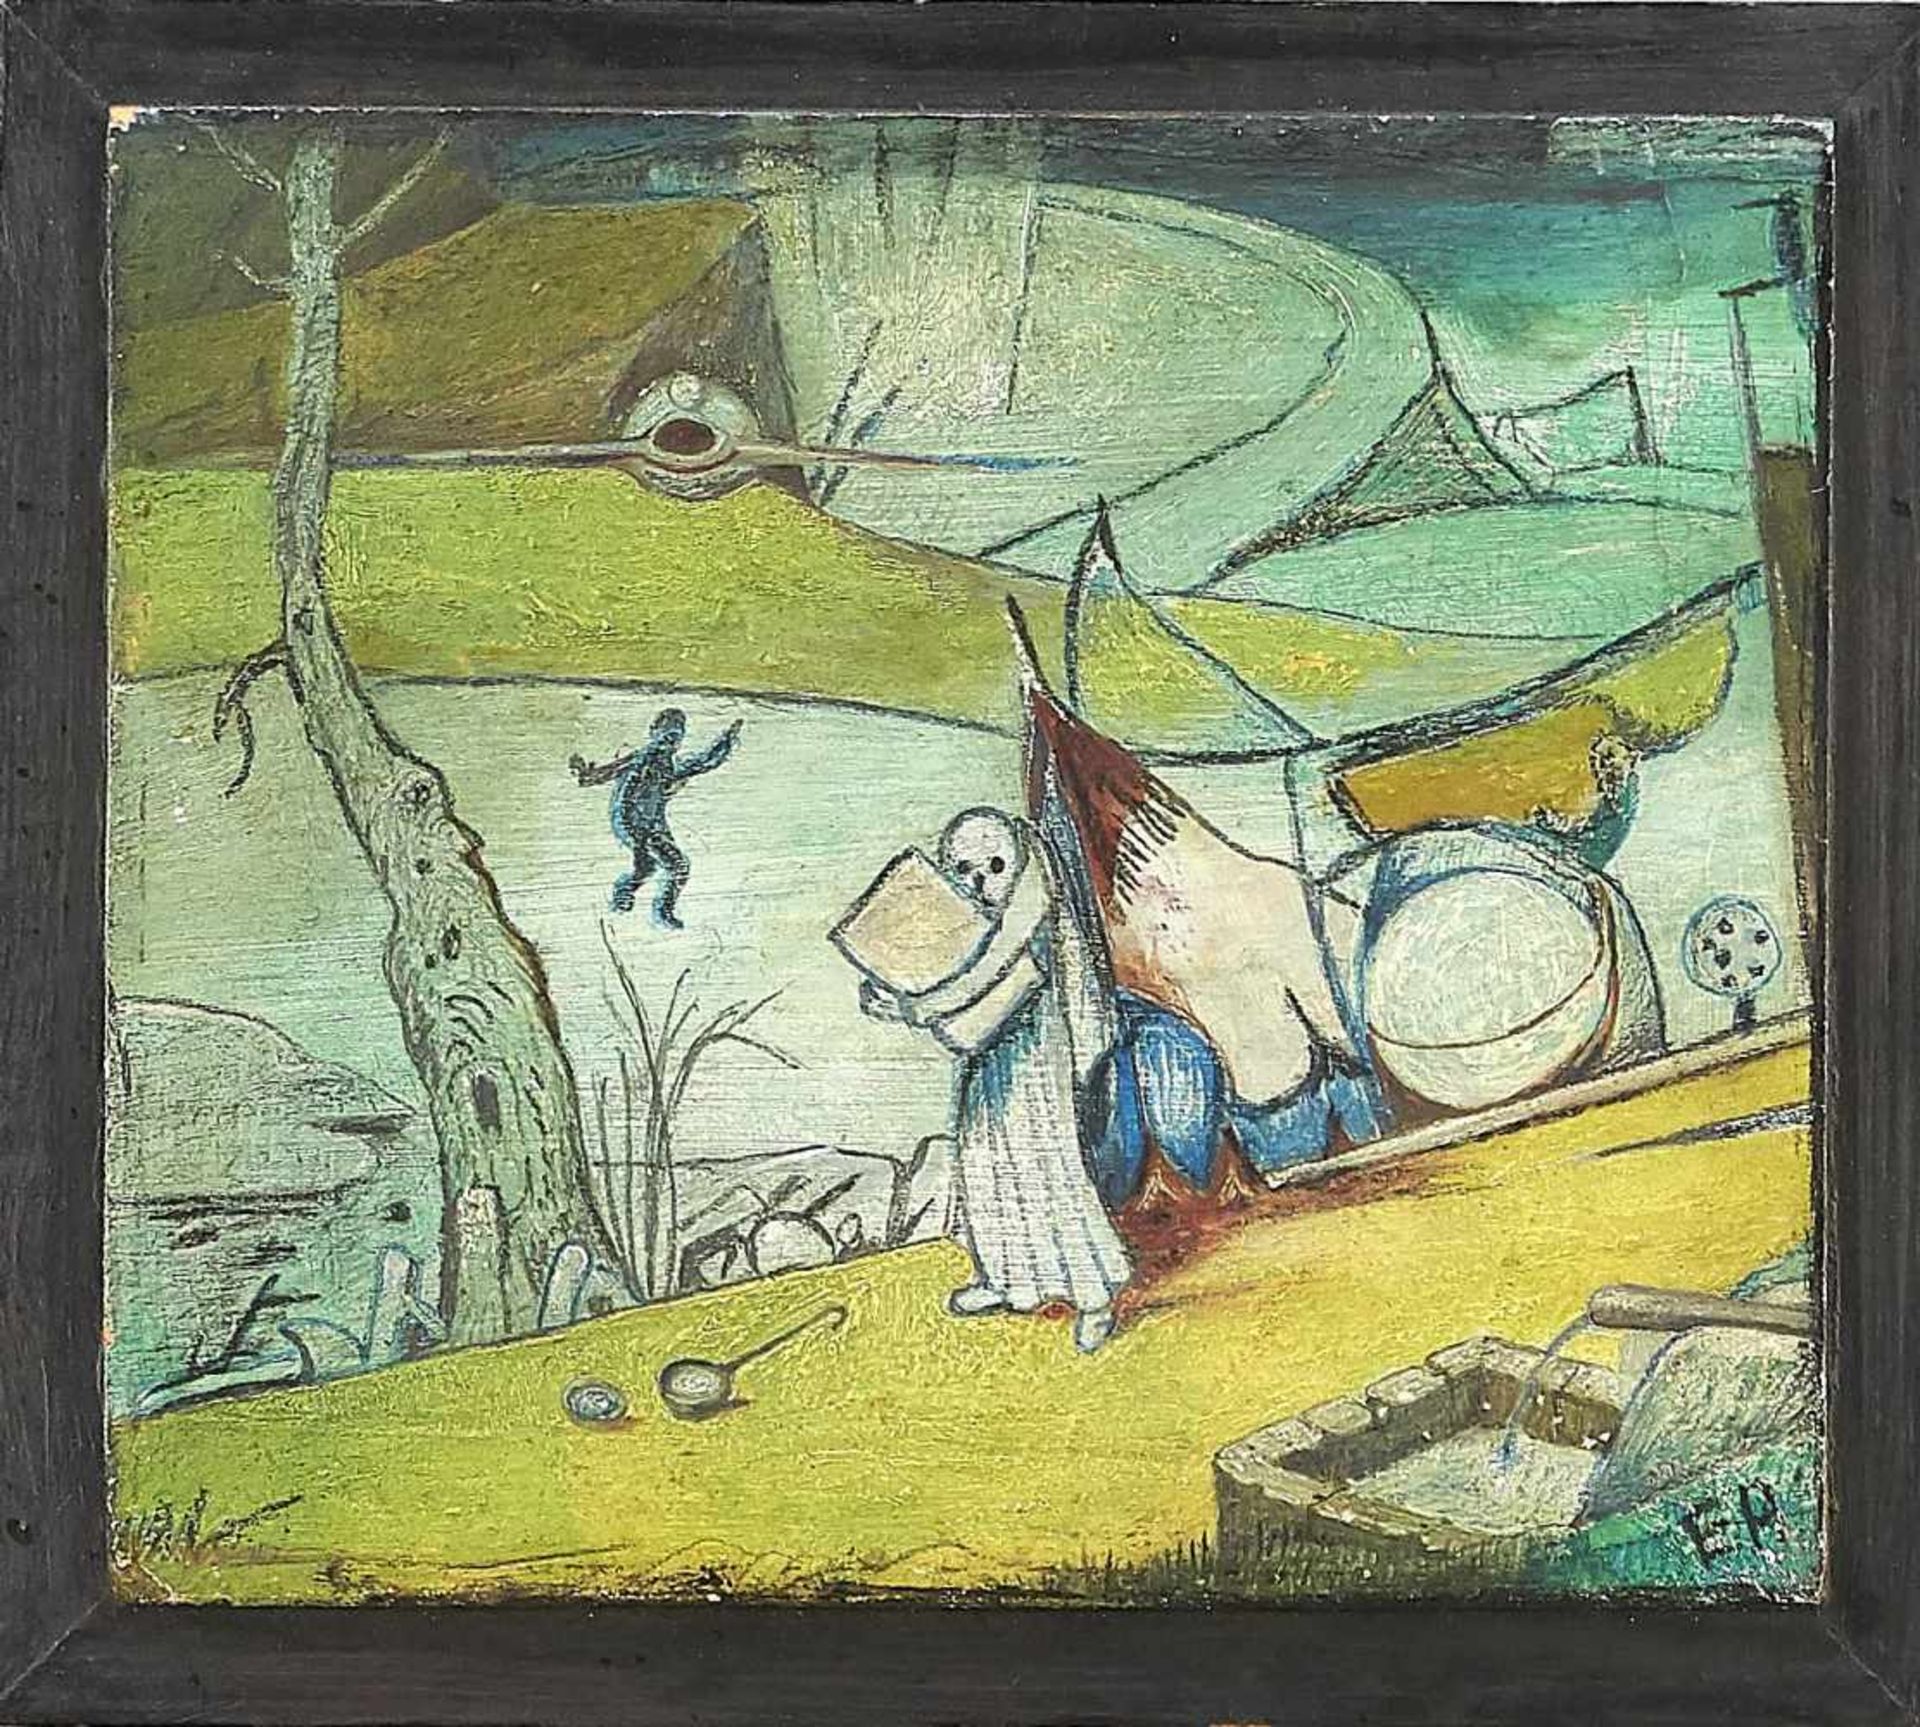 Monogramist E.P., Surrealist mid-20th century, surreal landscape with two figures and allsorts of